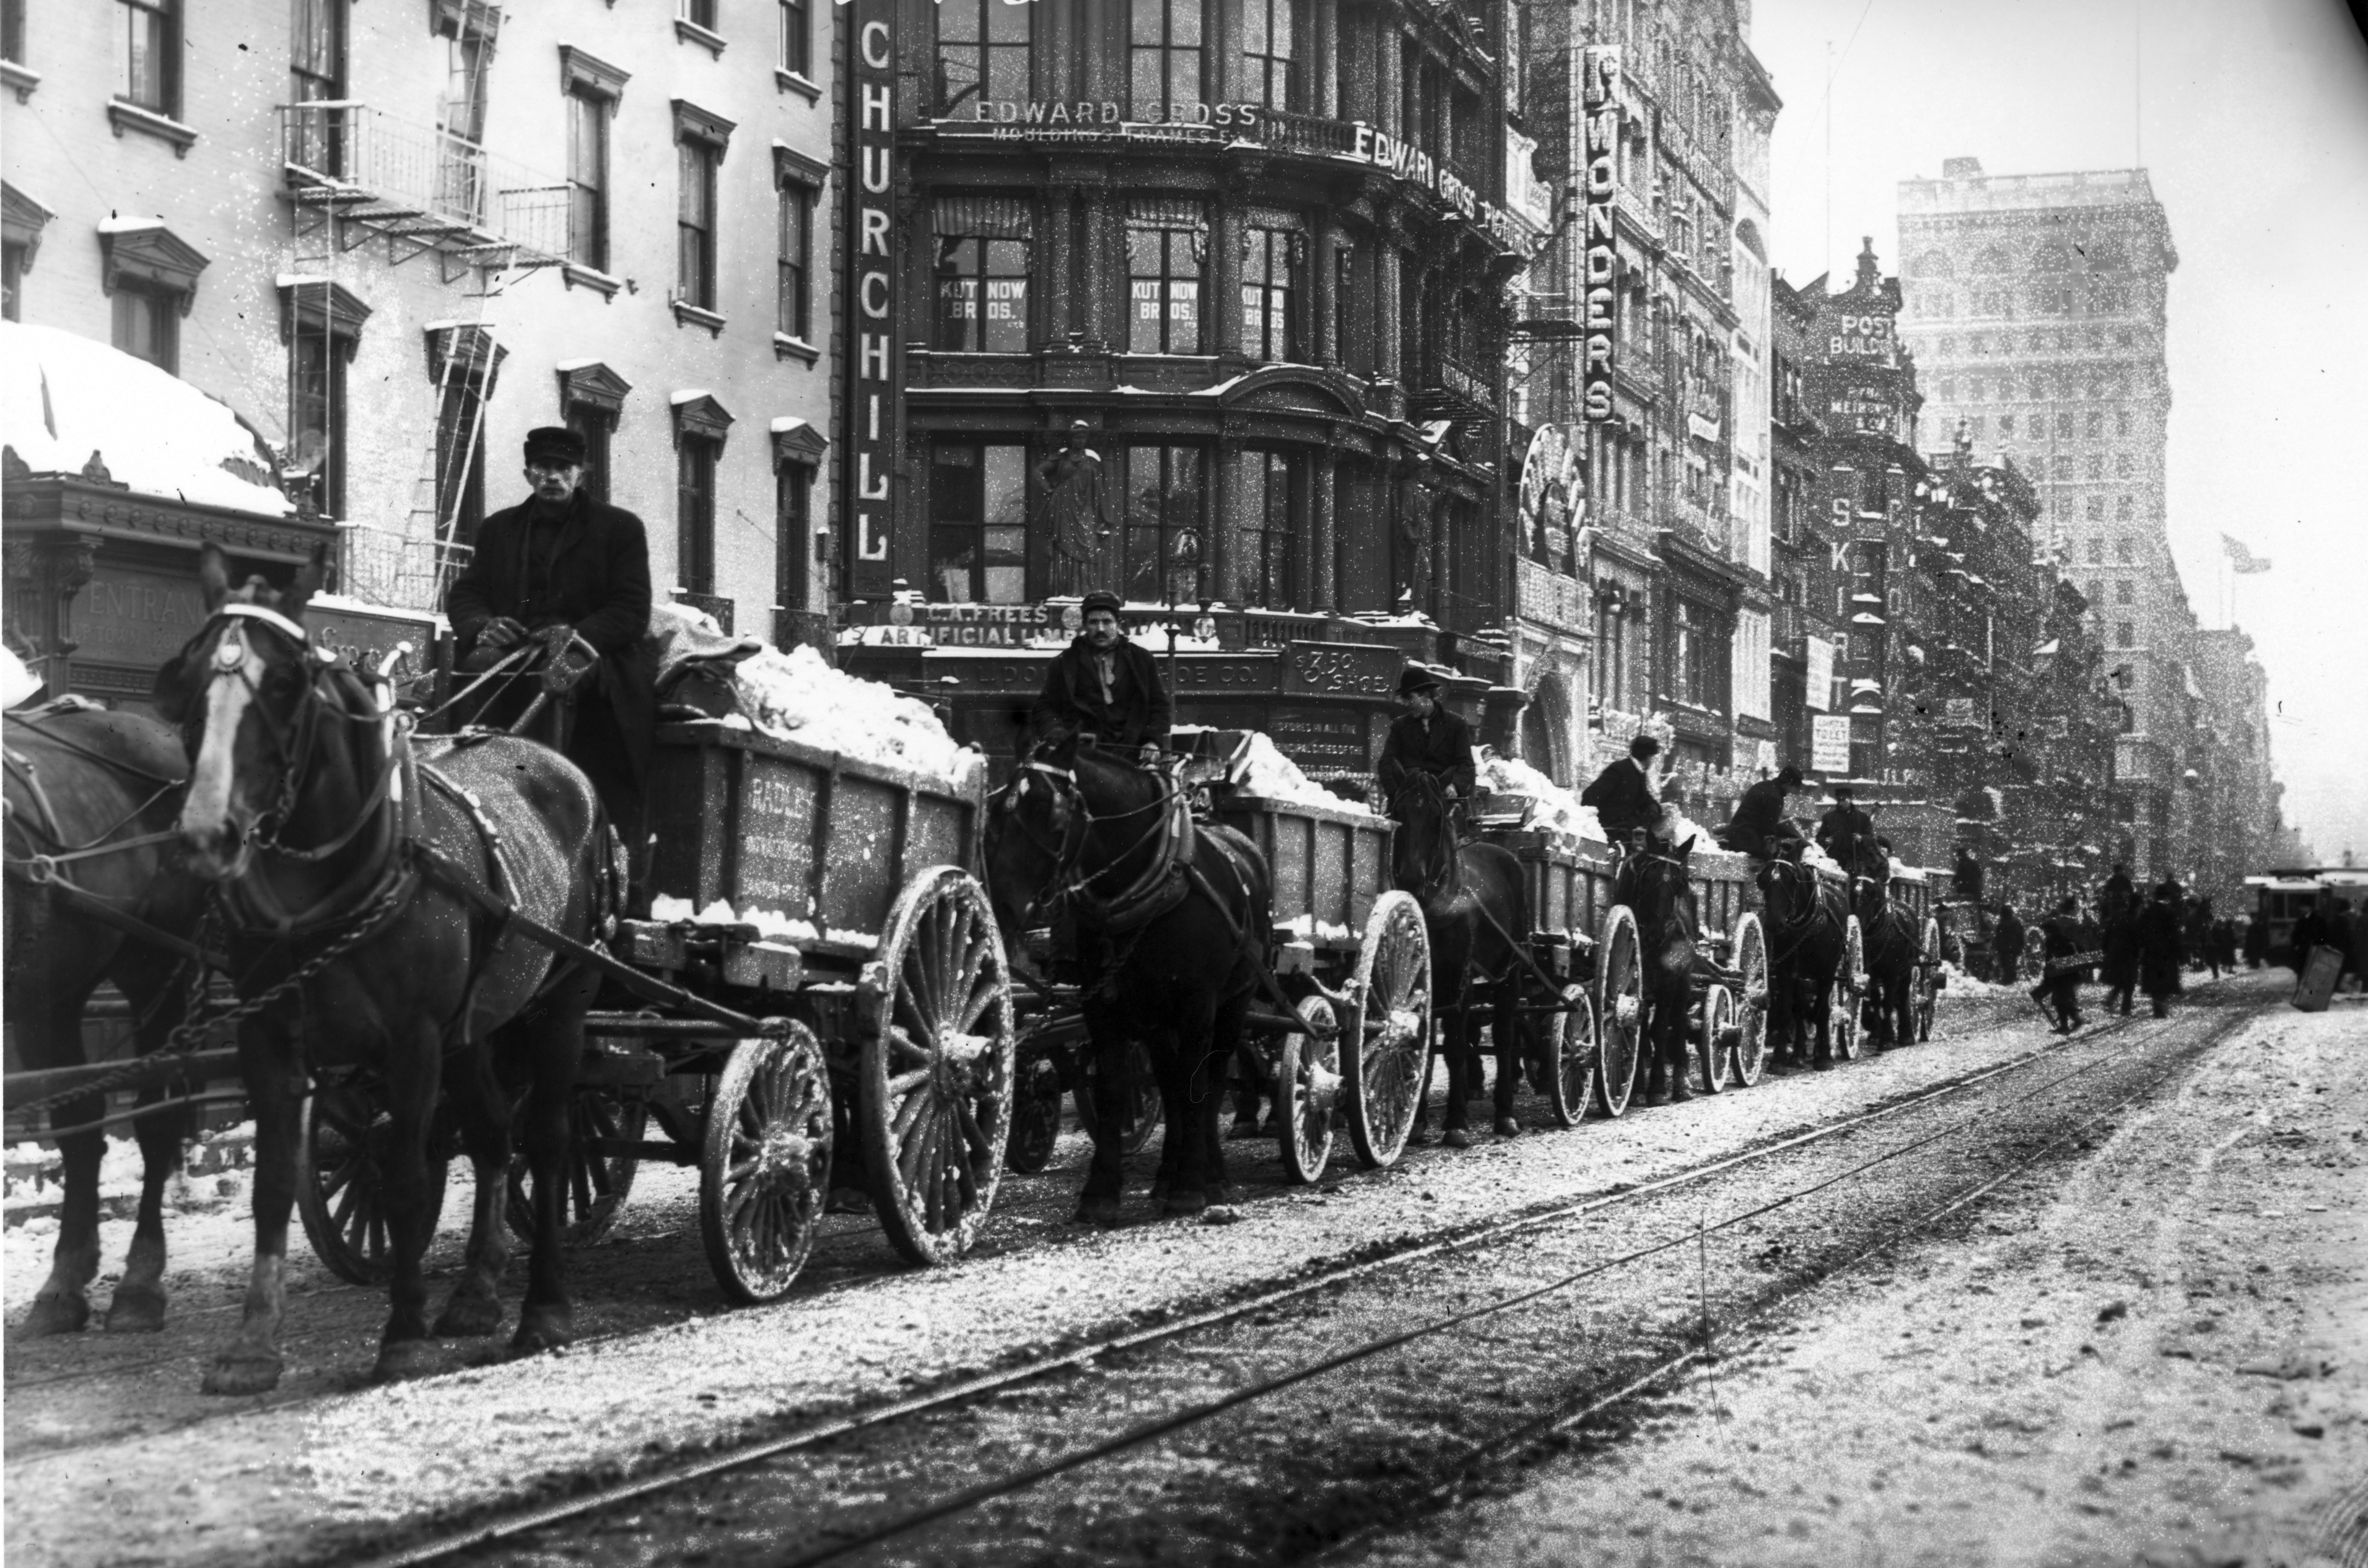 Old New York In Photos #35 - 1908 Snowstorm